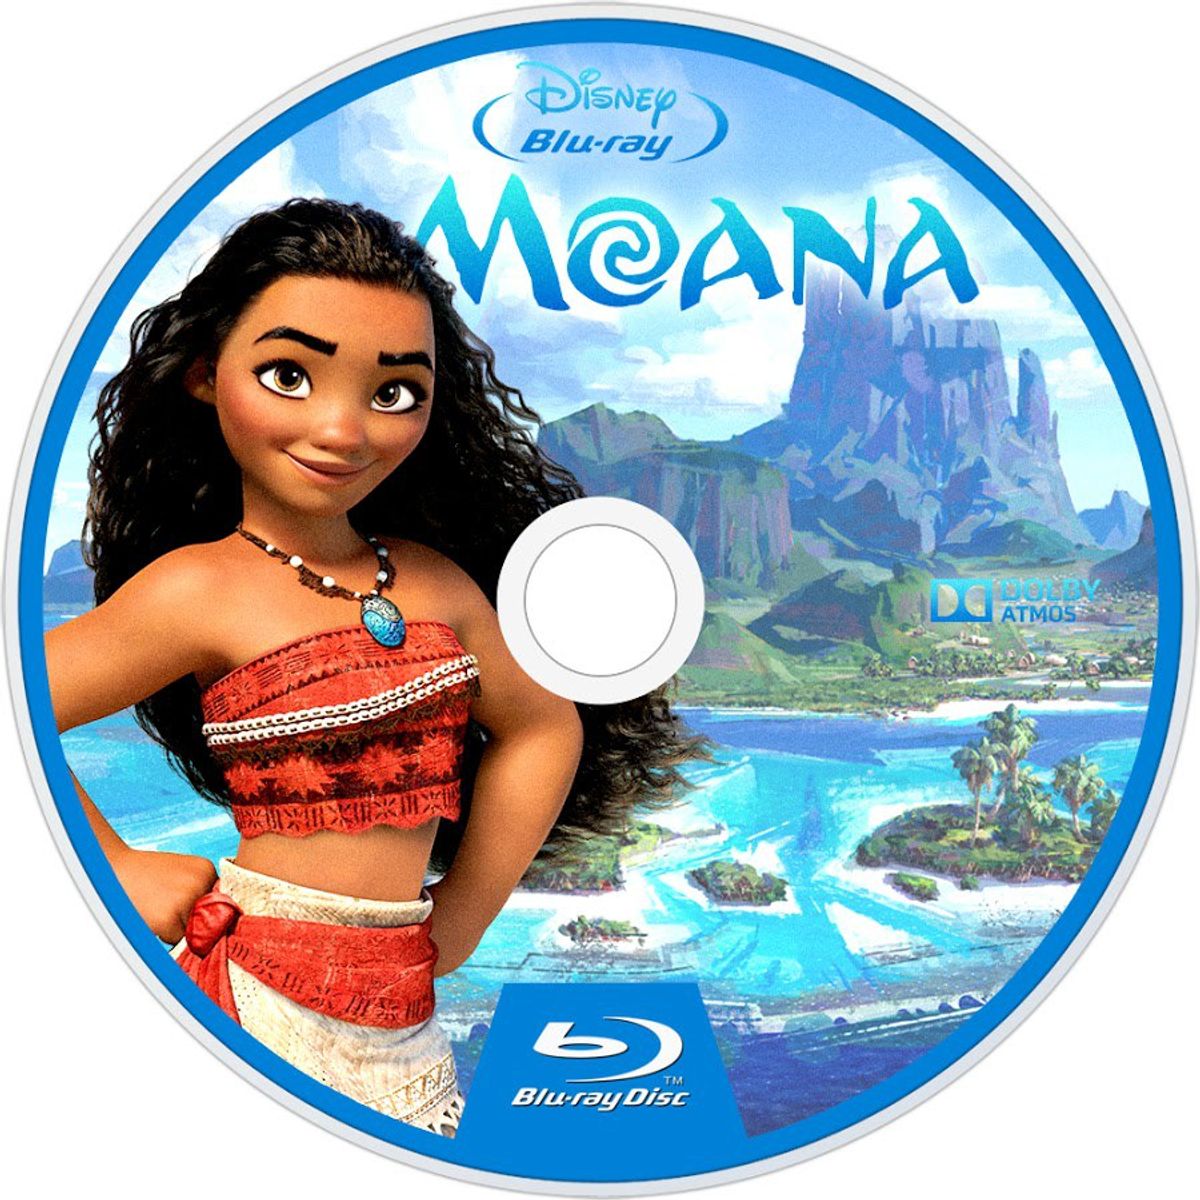 Have you seen Moana?!?